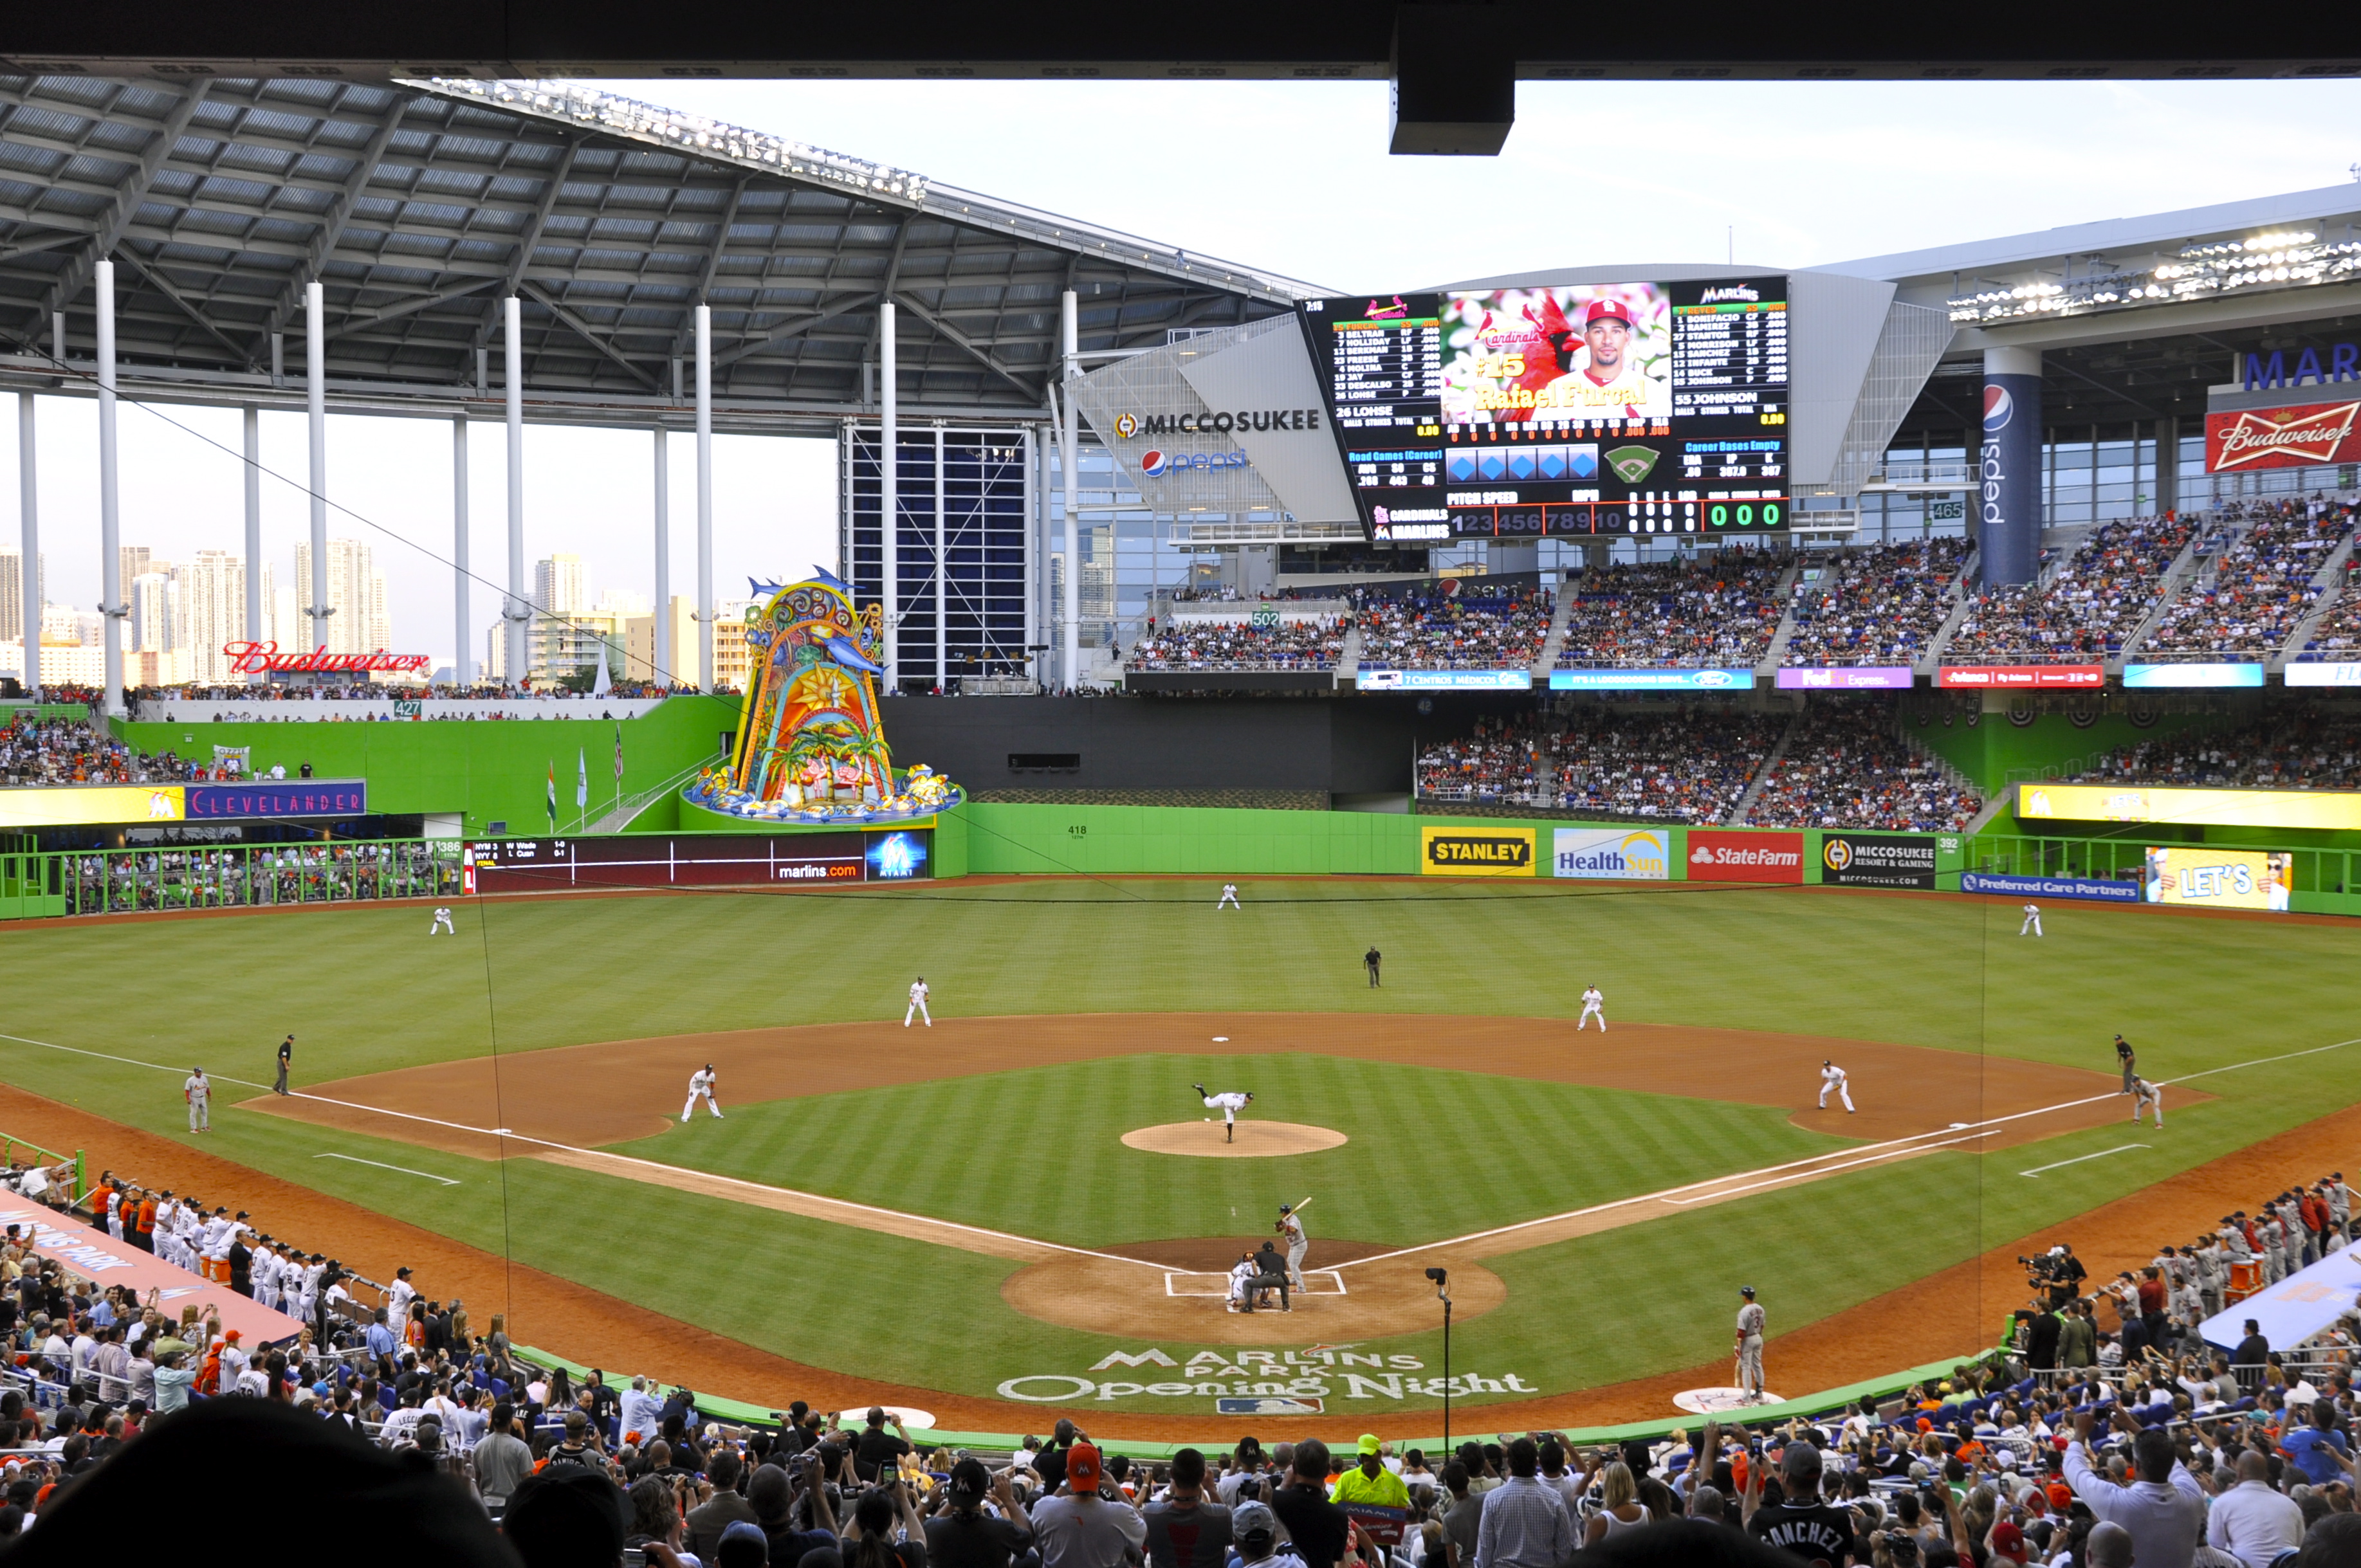 Marlins_First_Pitch_at_Marlins_Park,_Apr